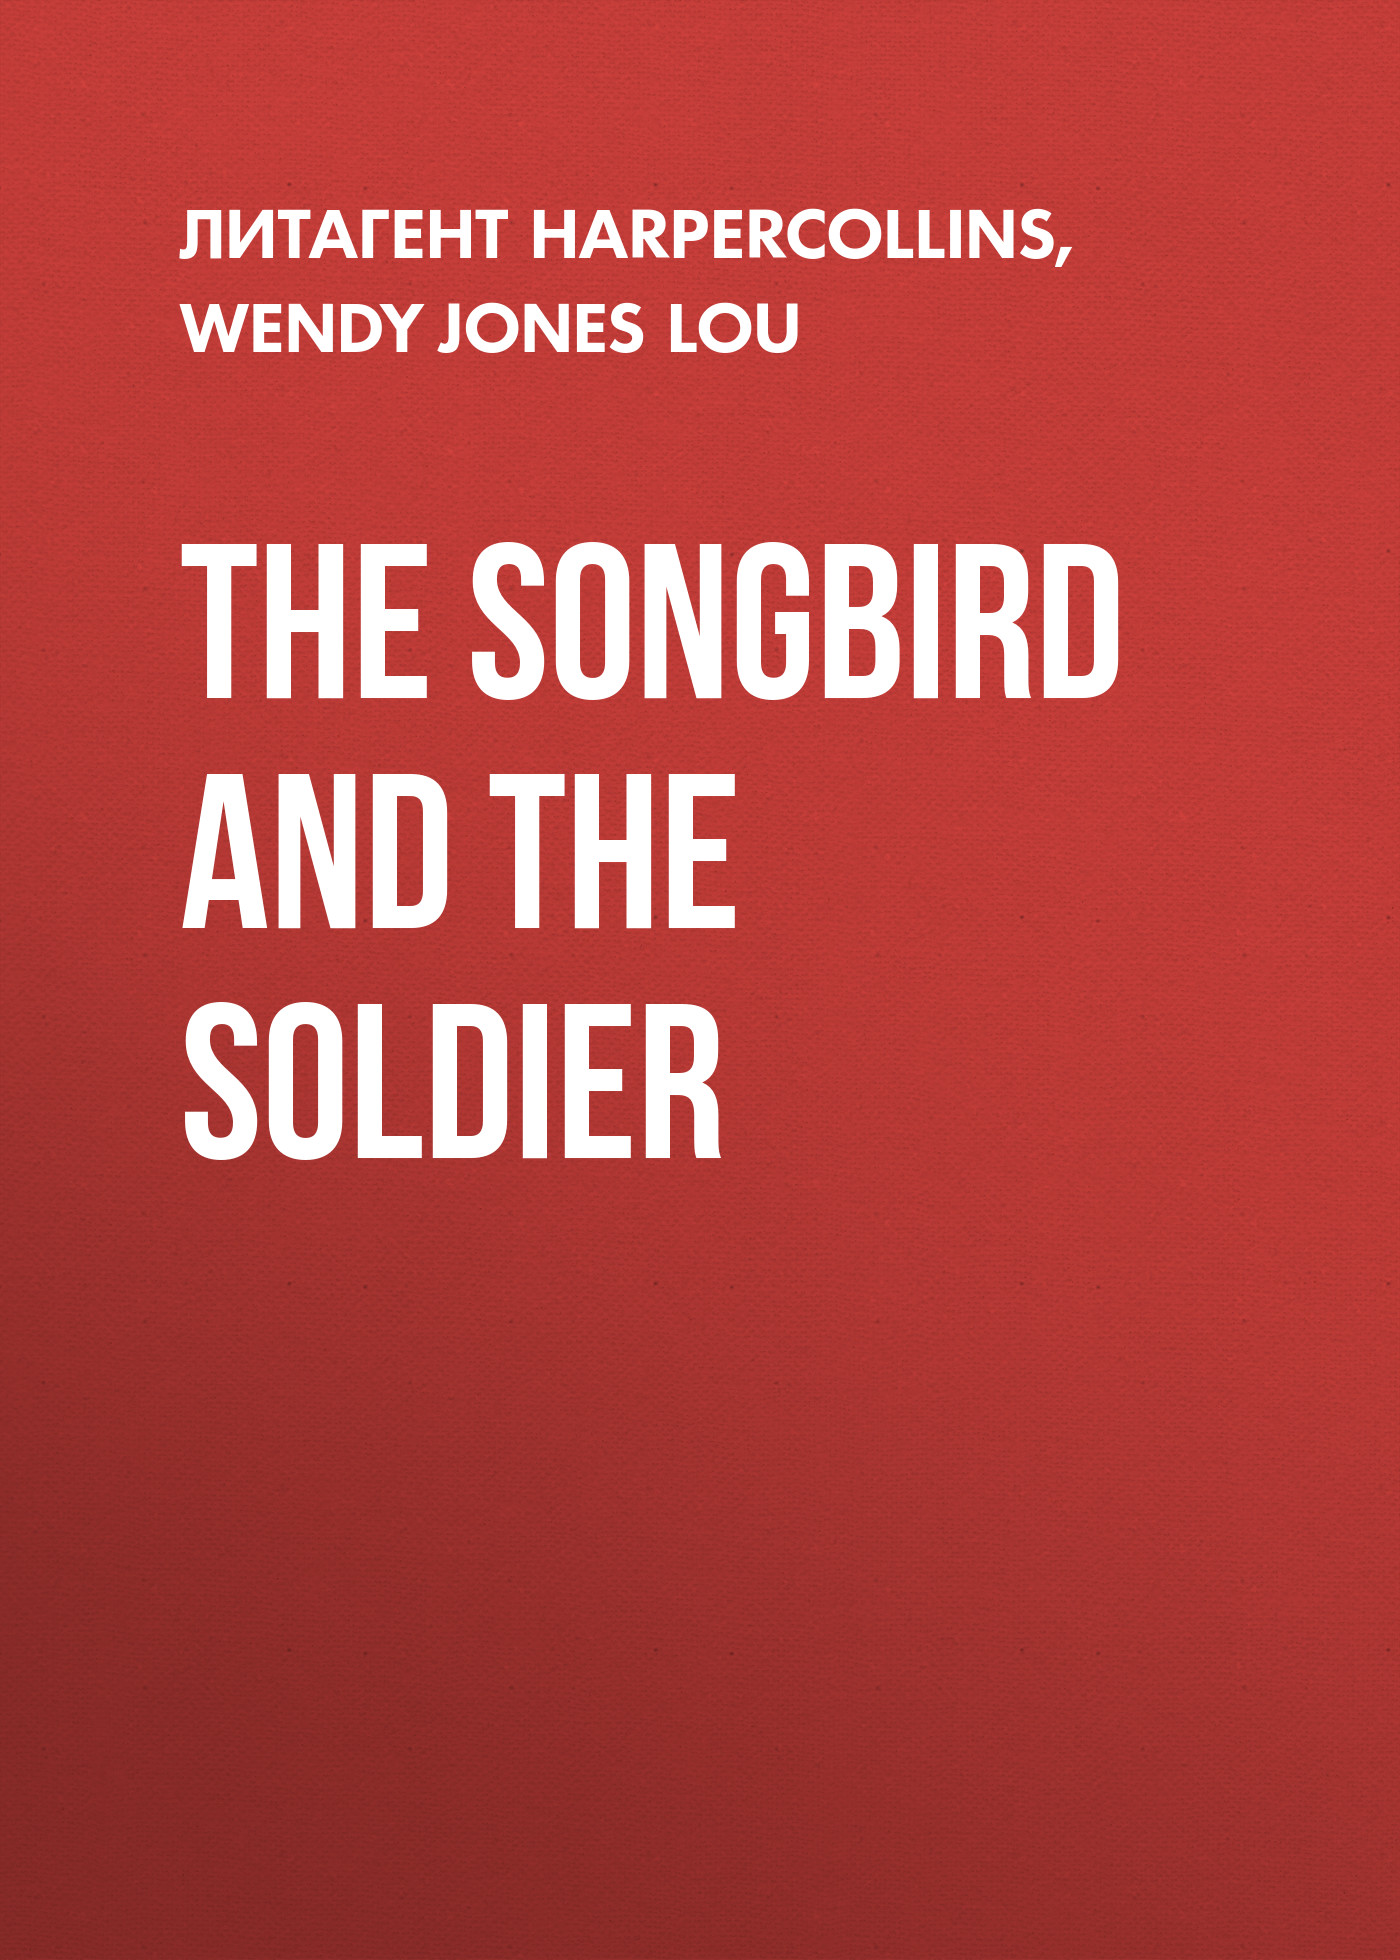 The Songbird and the Soldier